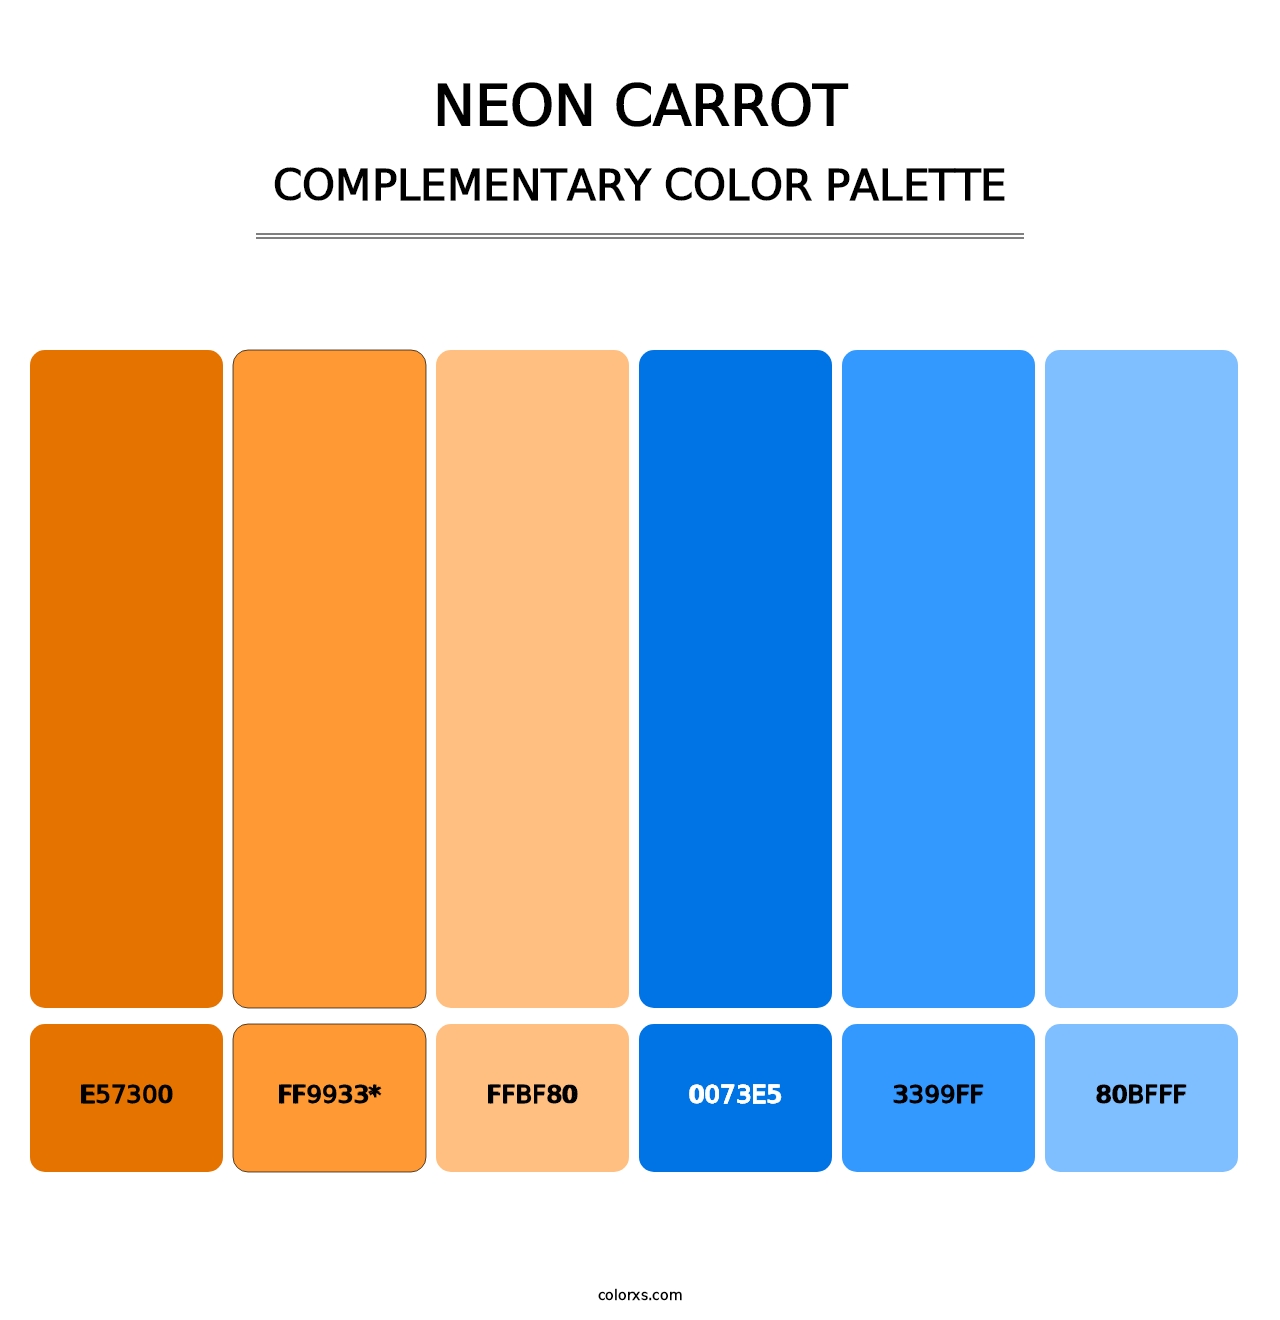 Neon Carrot - Complementary Color Palette